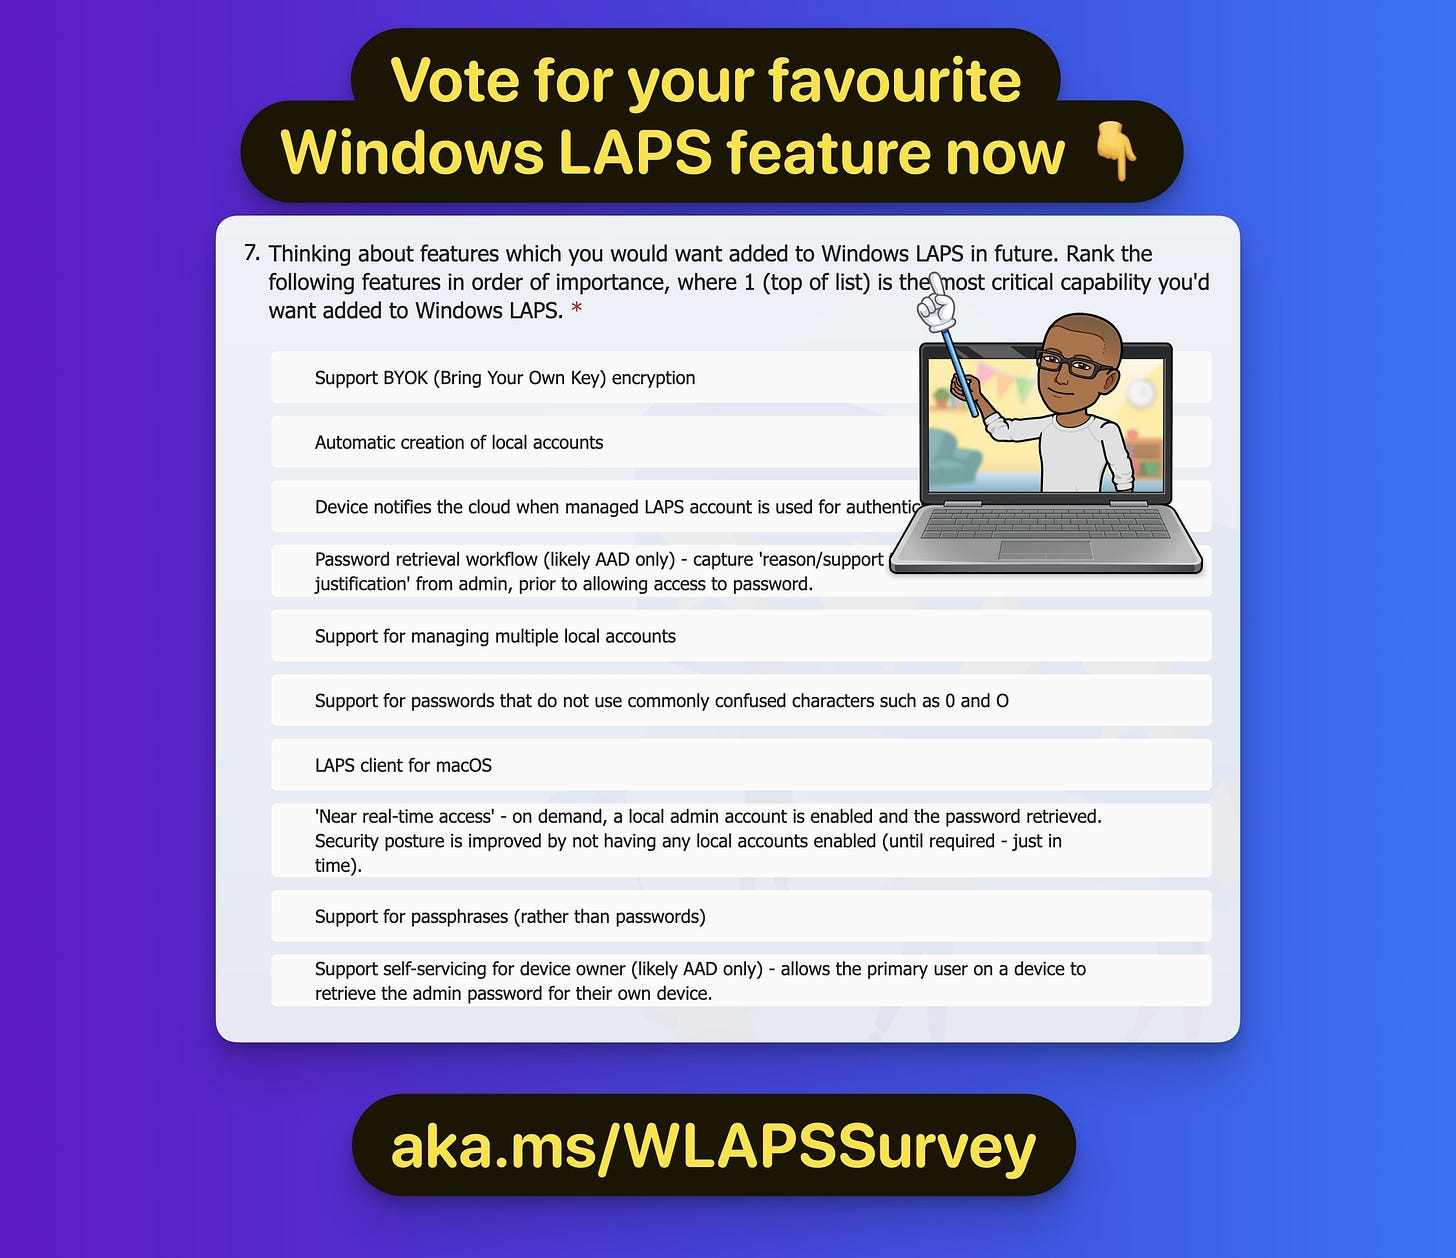 Vote for your favourite Windows LAPS feature now

aka.ms/WLAPSSurvey